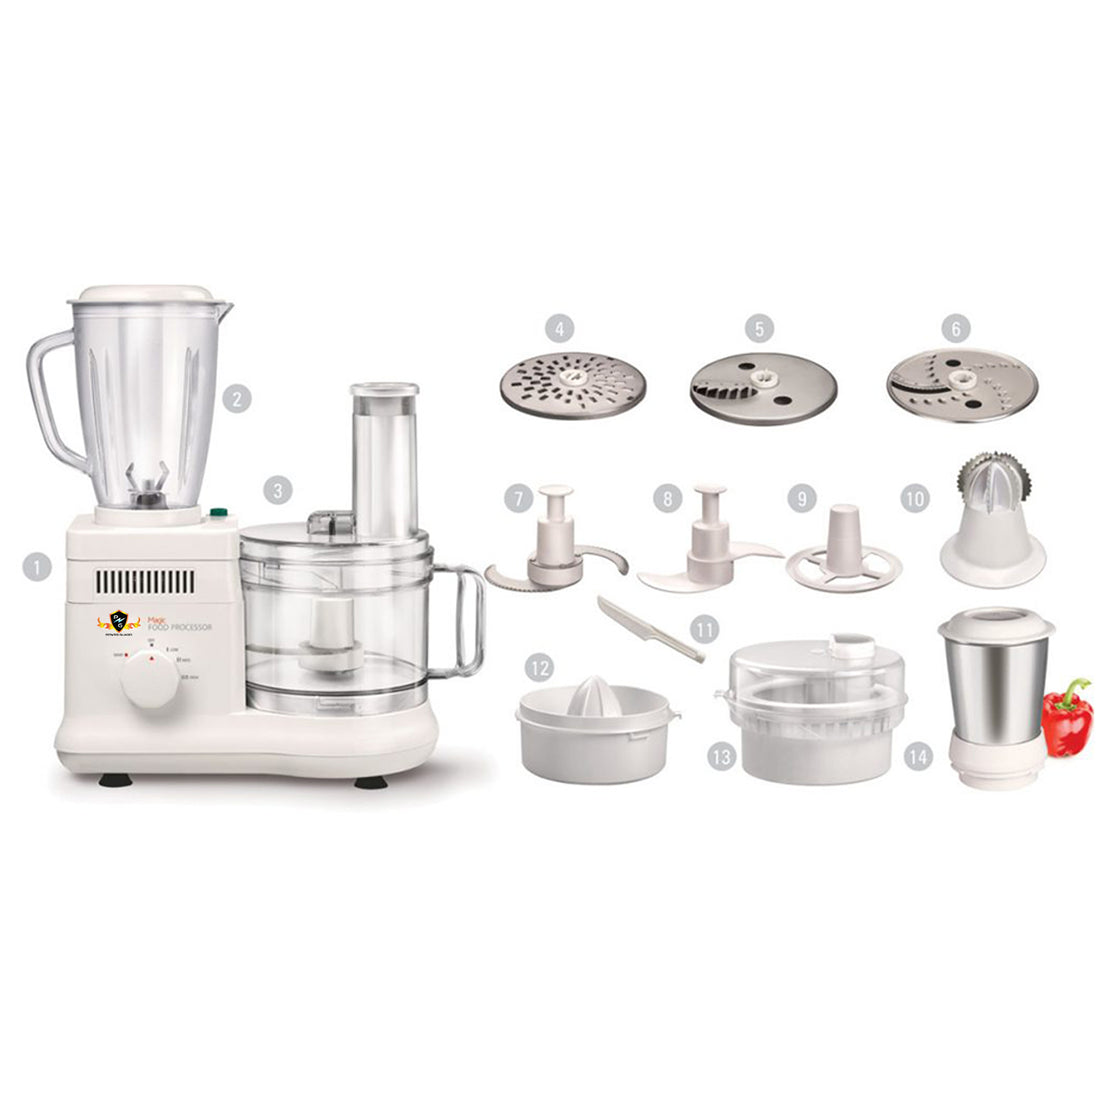  The Best Food Processors for Indian Cooking: Top Picks and Features